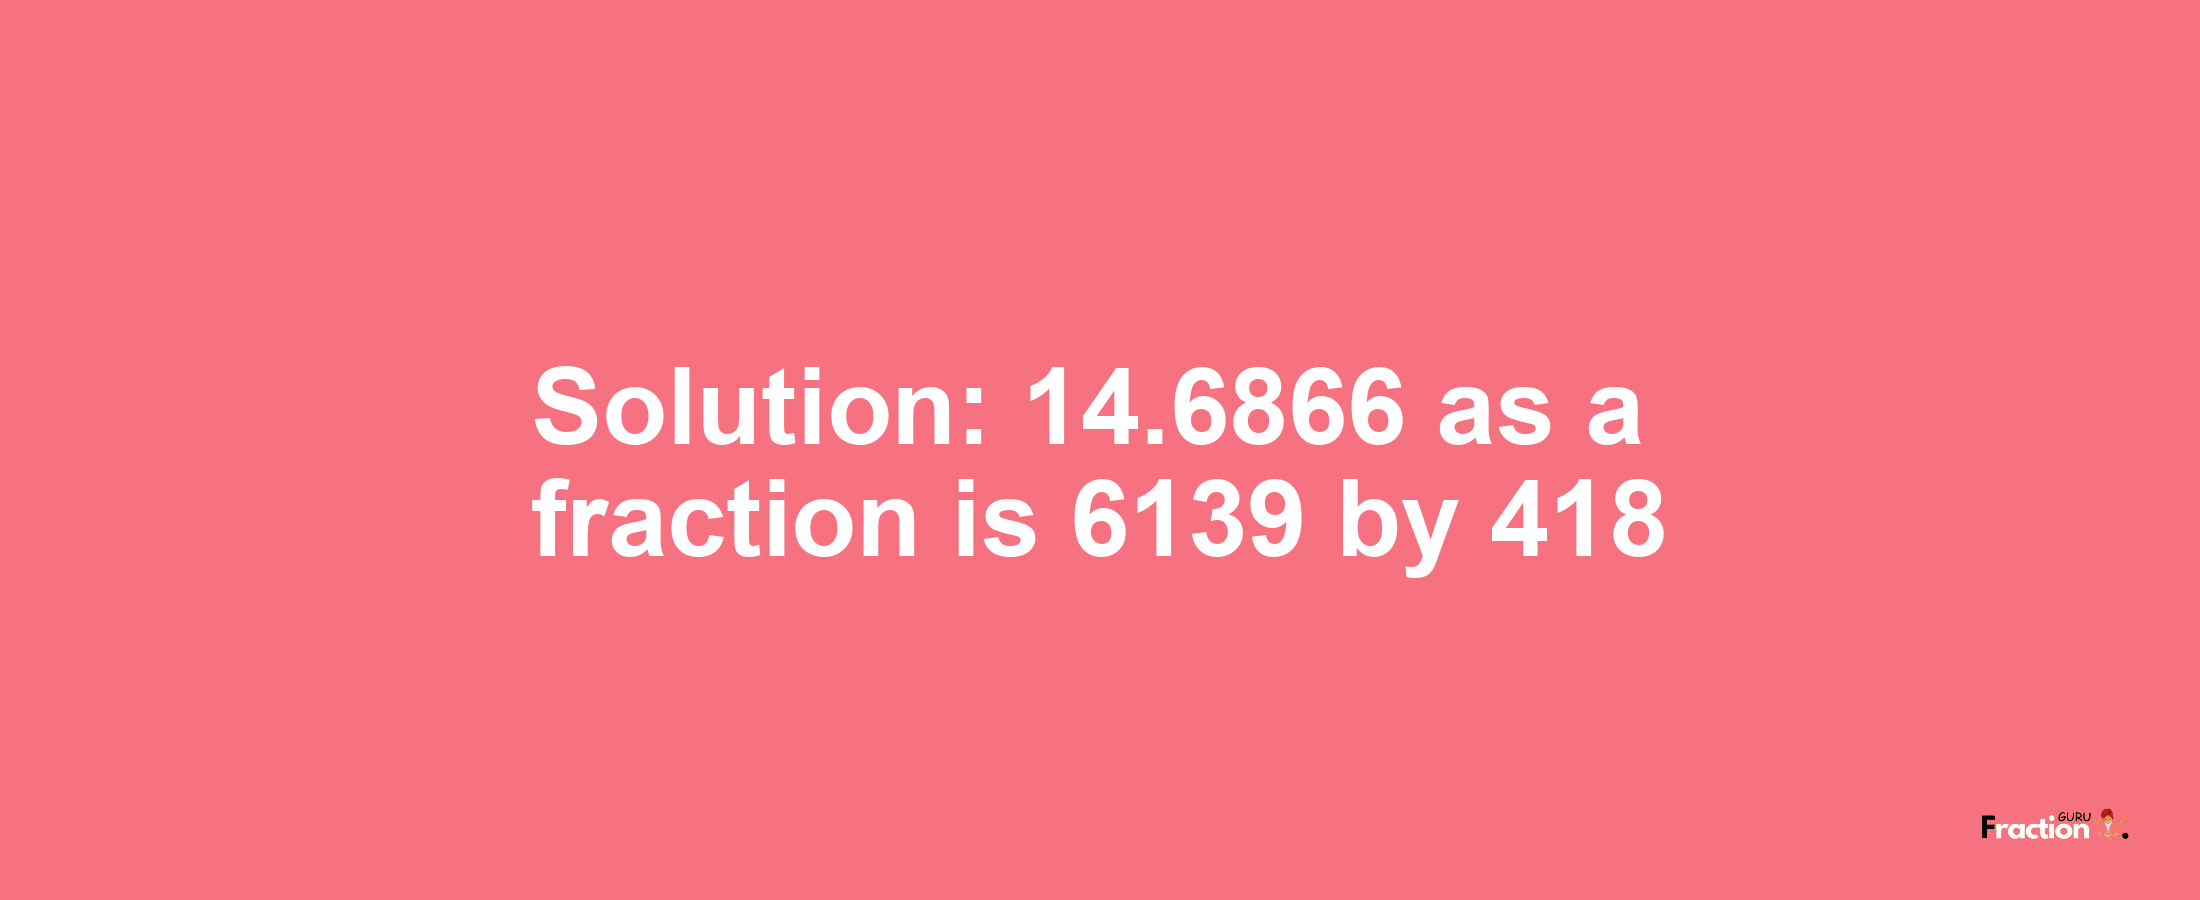 Solution:14.6866 as a fraction is 6139/418